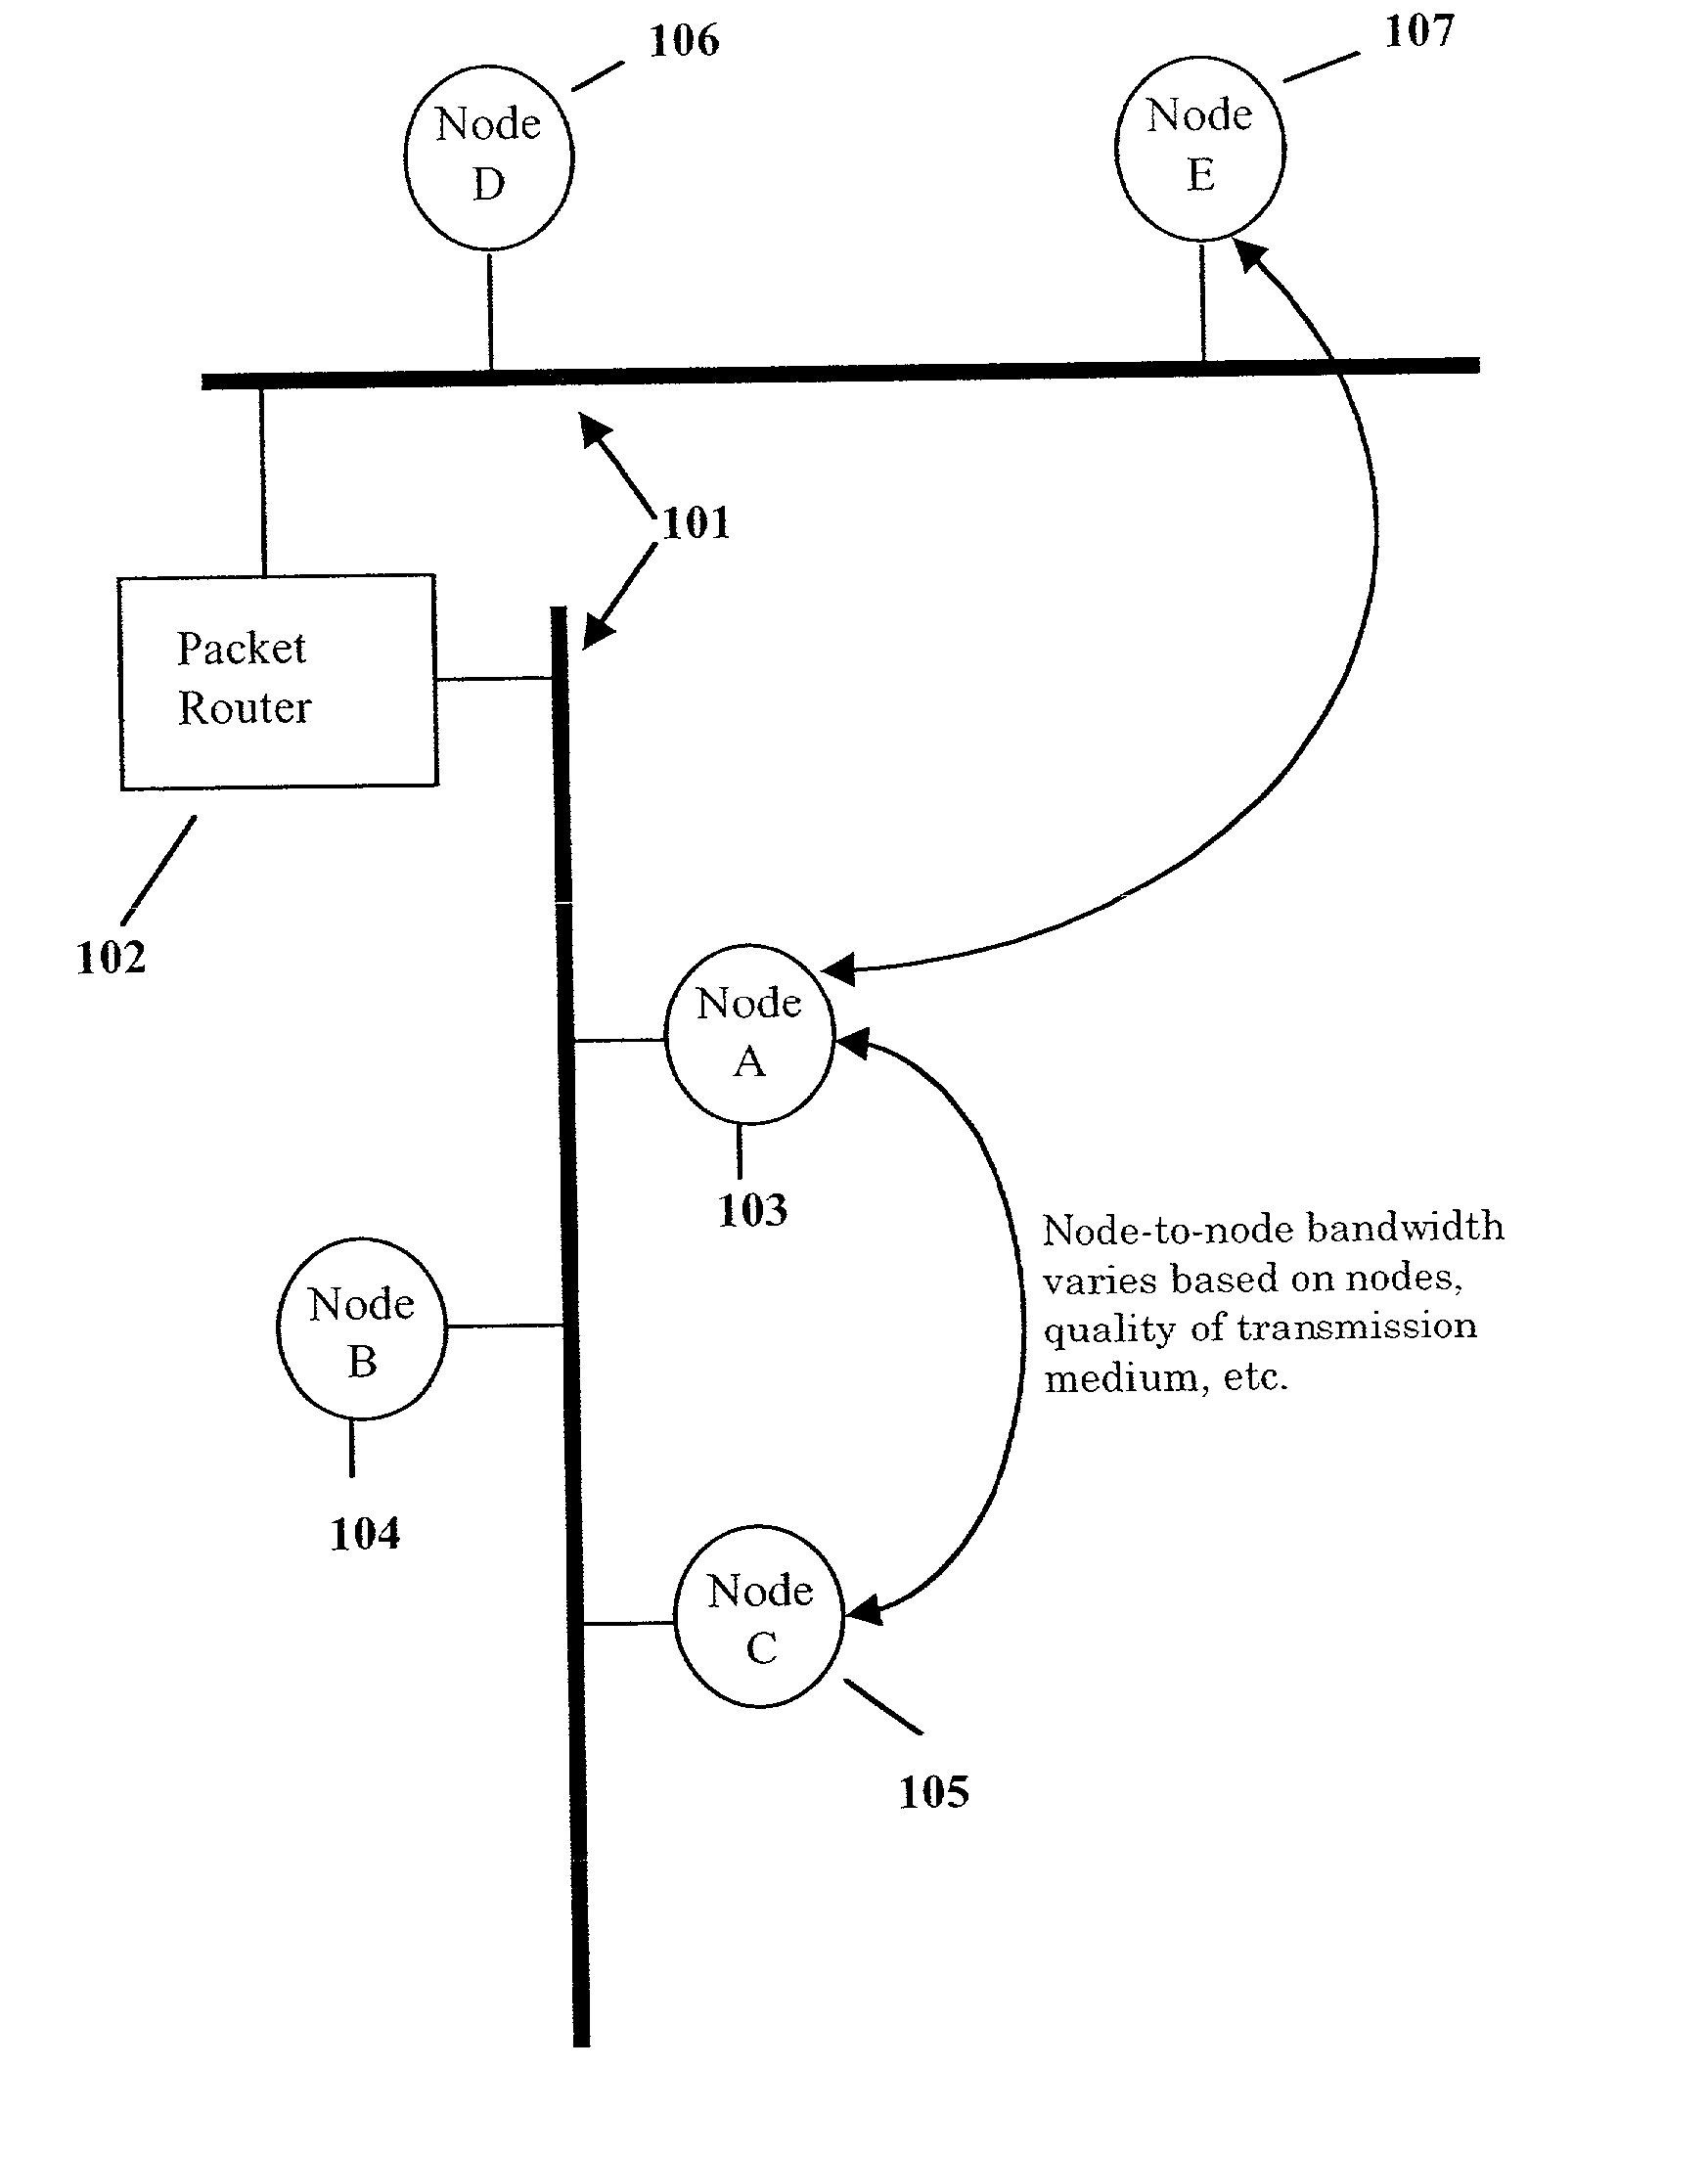 Method and apparatus implementing a multimedia digital network